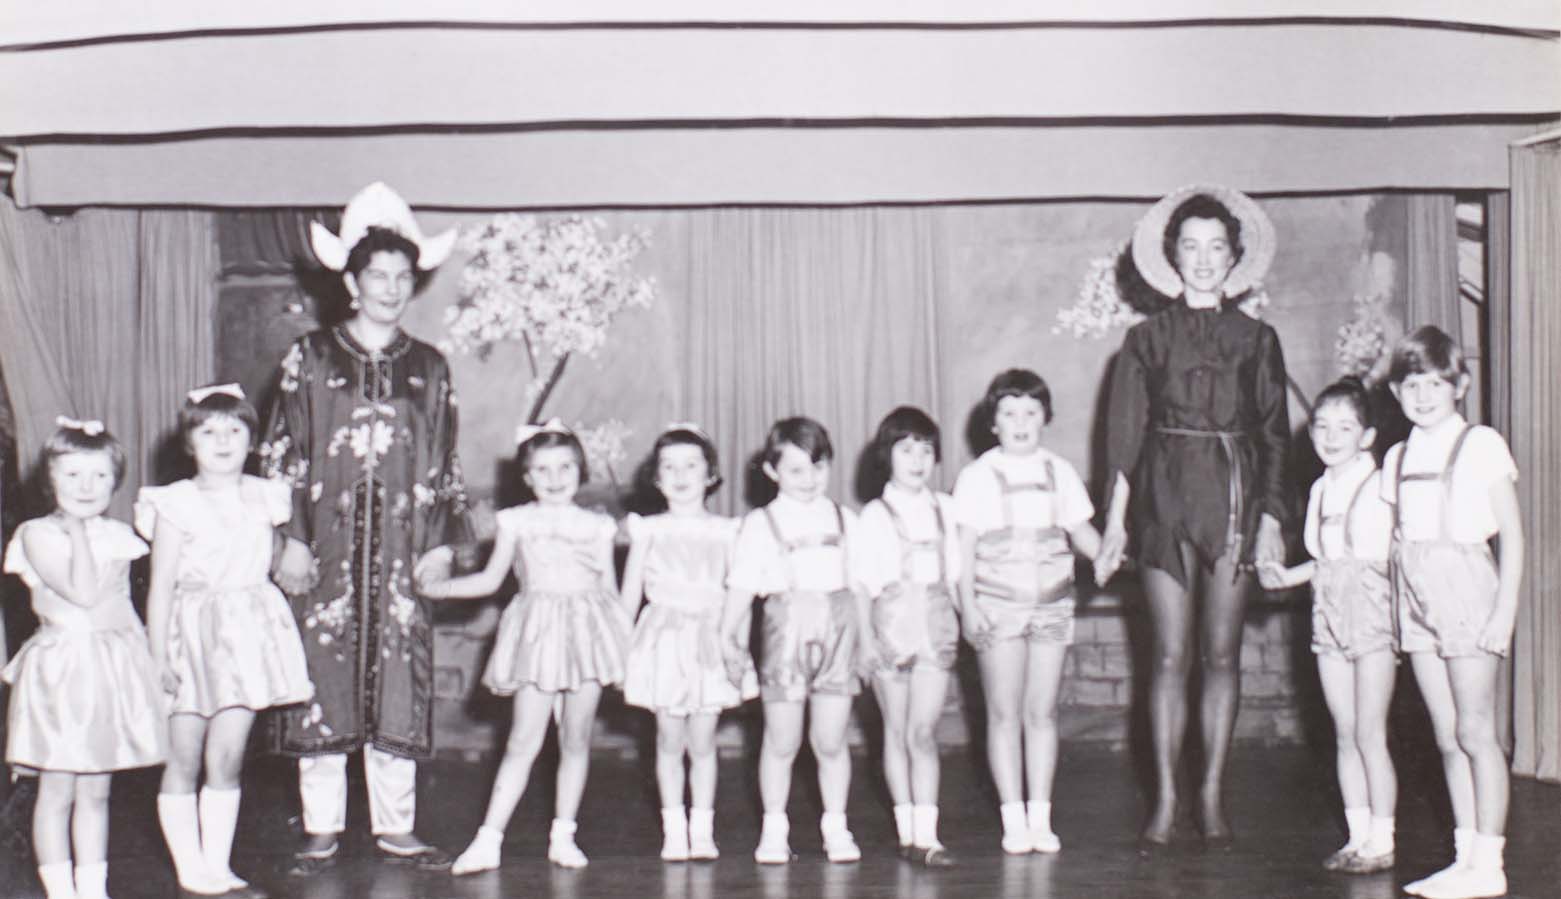 Photograph from the Bishopsteignton Pantomime 'Aladdin'